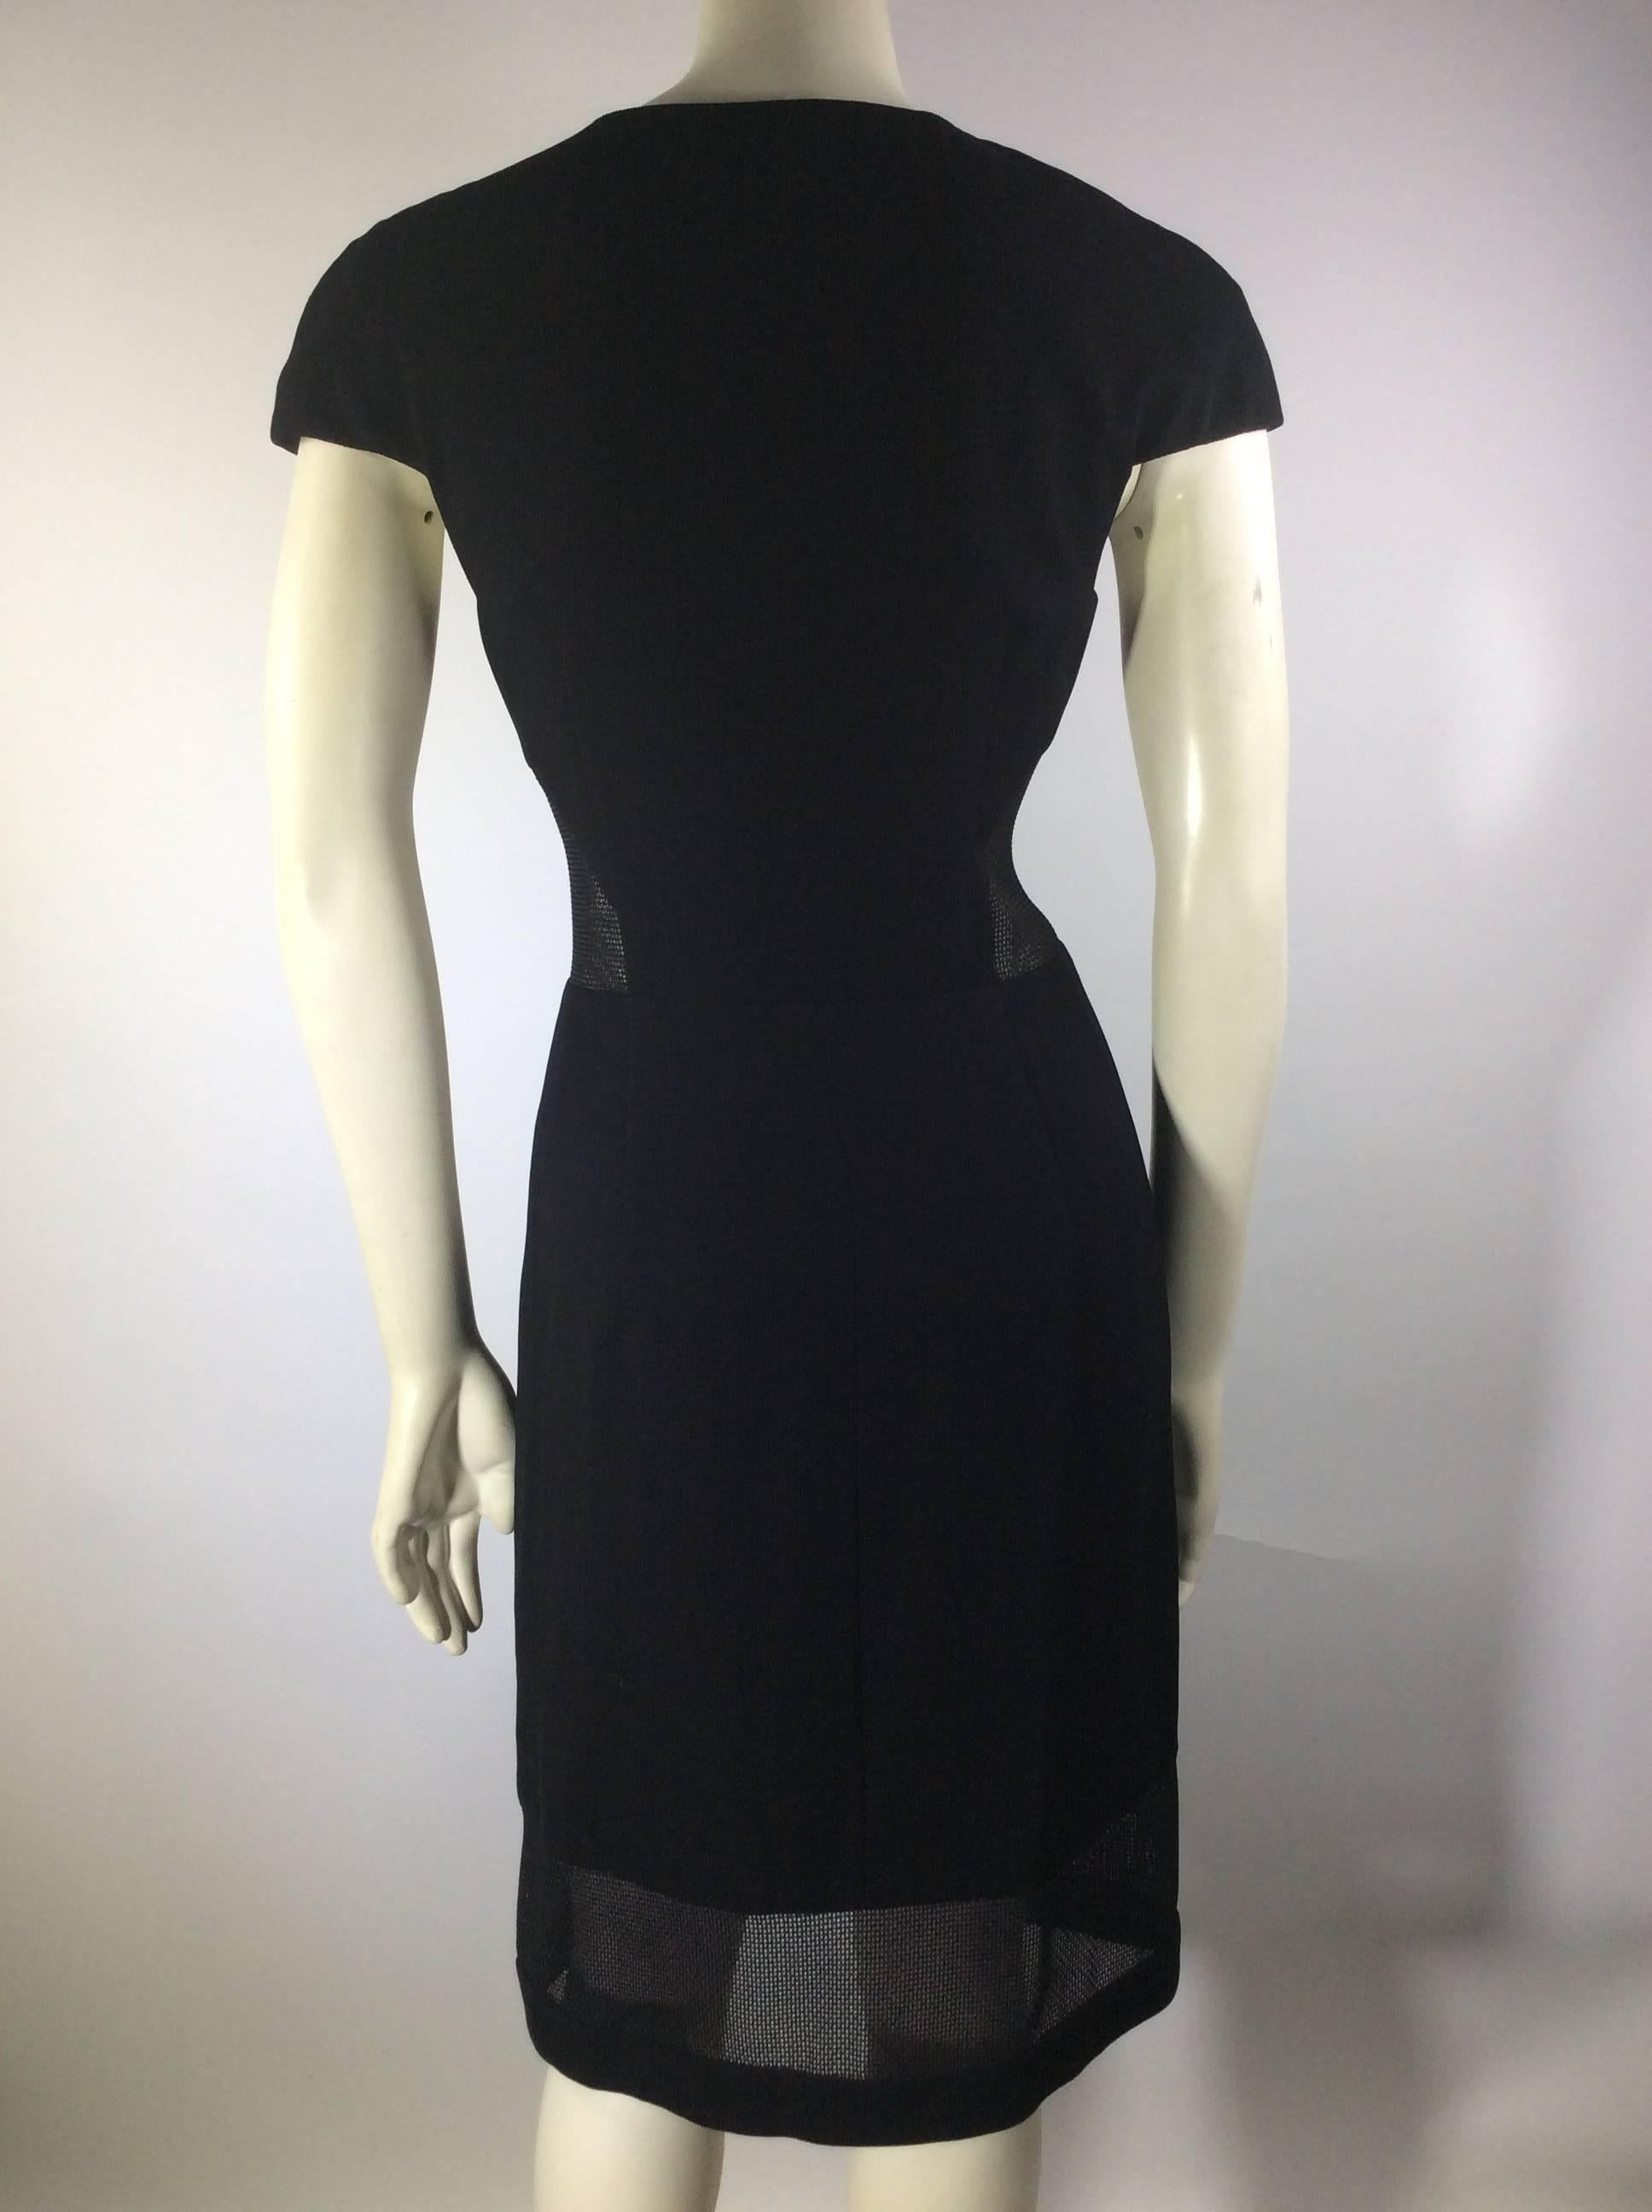 Women's L'Agence Black Crepe Dress with Gold Zipper and Mesh Detail 